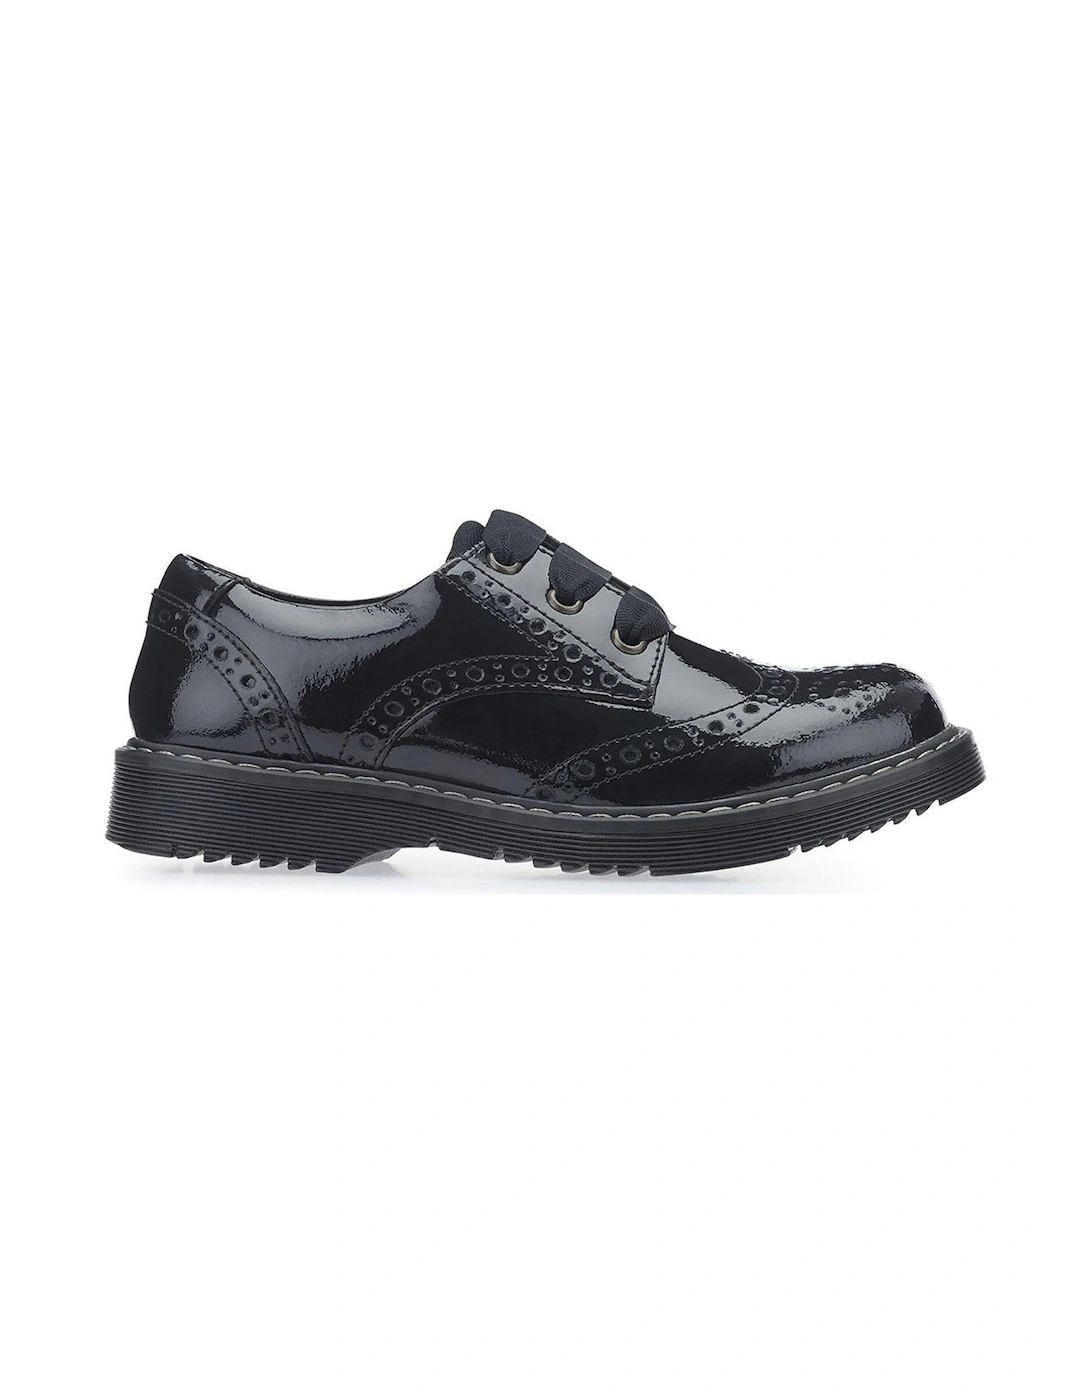 Impulsive Girls Black Patent Leather Lace Up Chunky Sole School Shoes With Brogue Styling - Black, 2 of 1